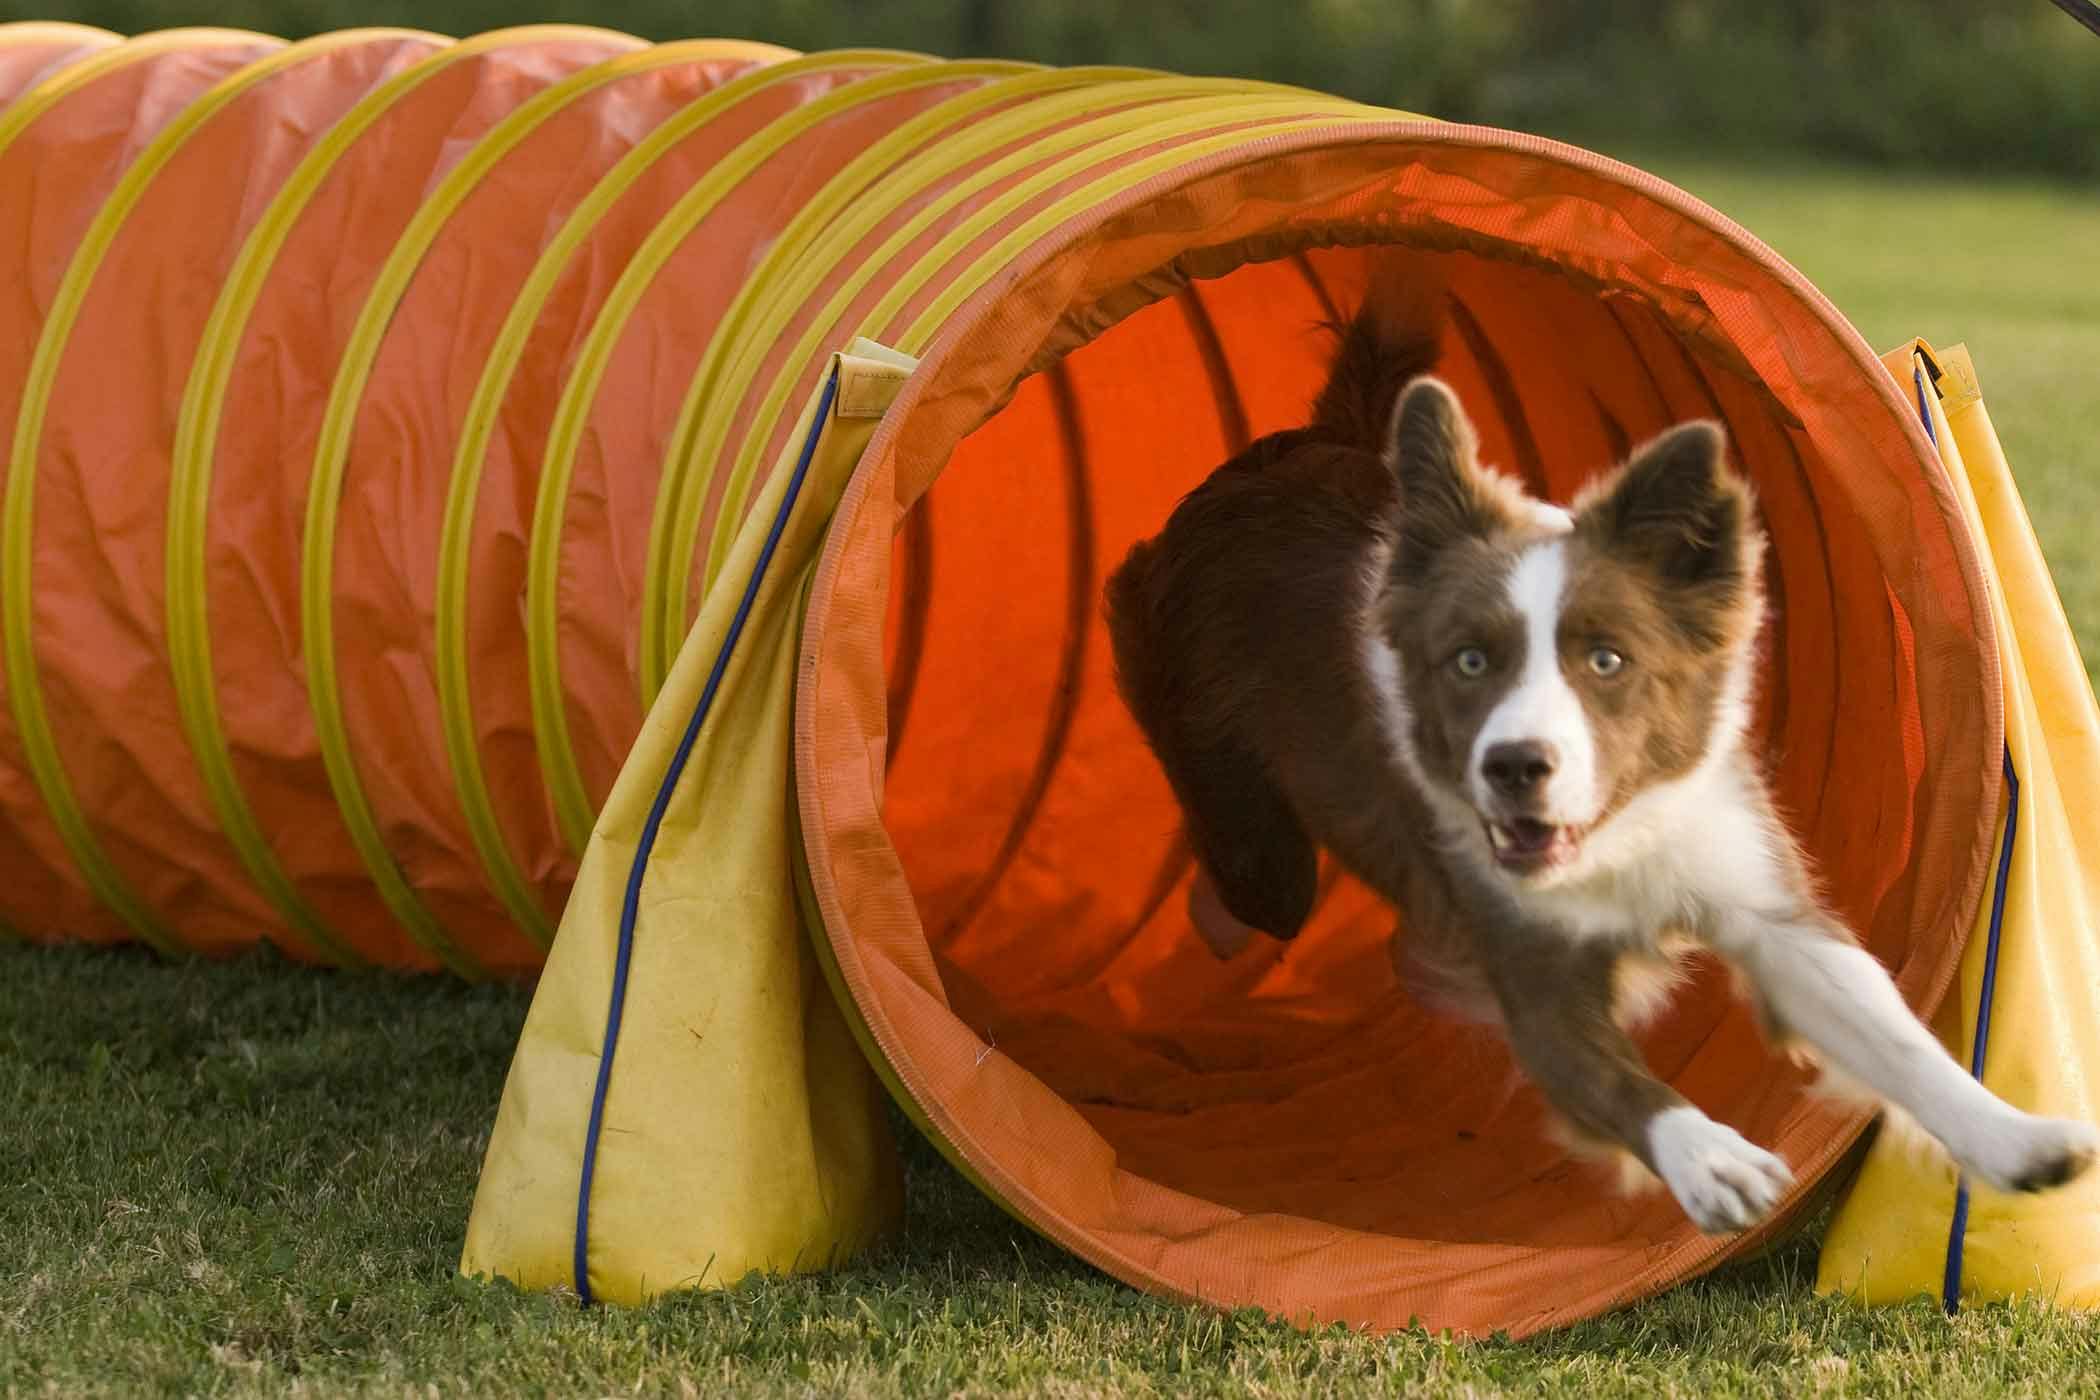 WUIIEN Pet Dog Tunnel Training Tunne Outdoor Obedience Exercise Track Agility Games 